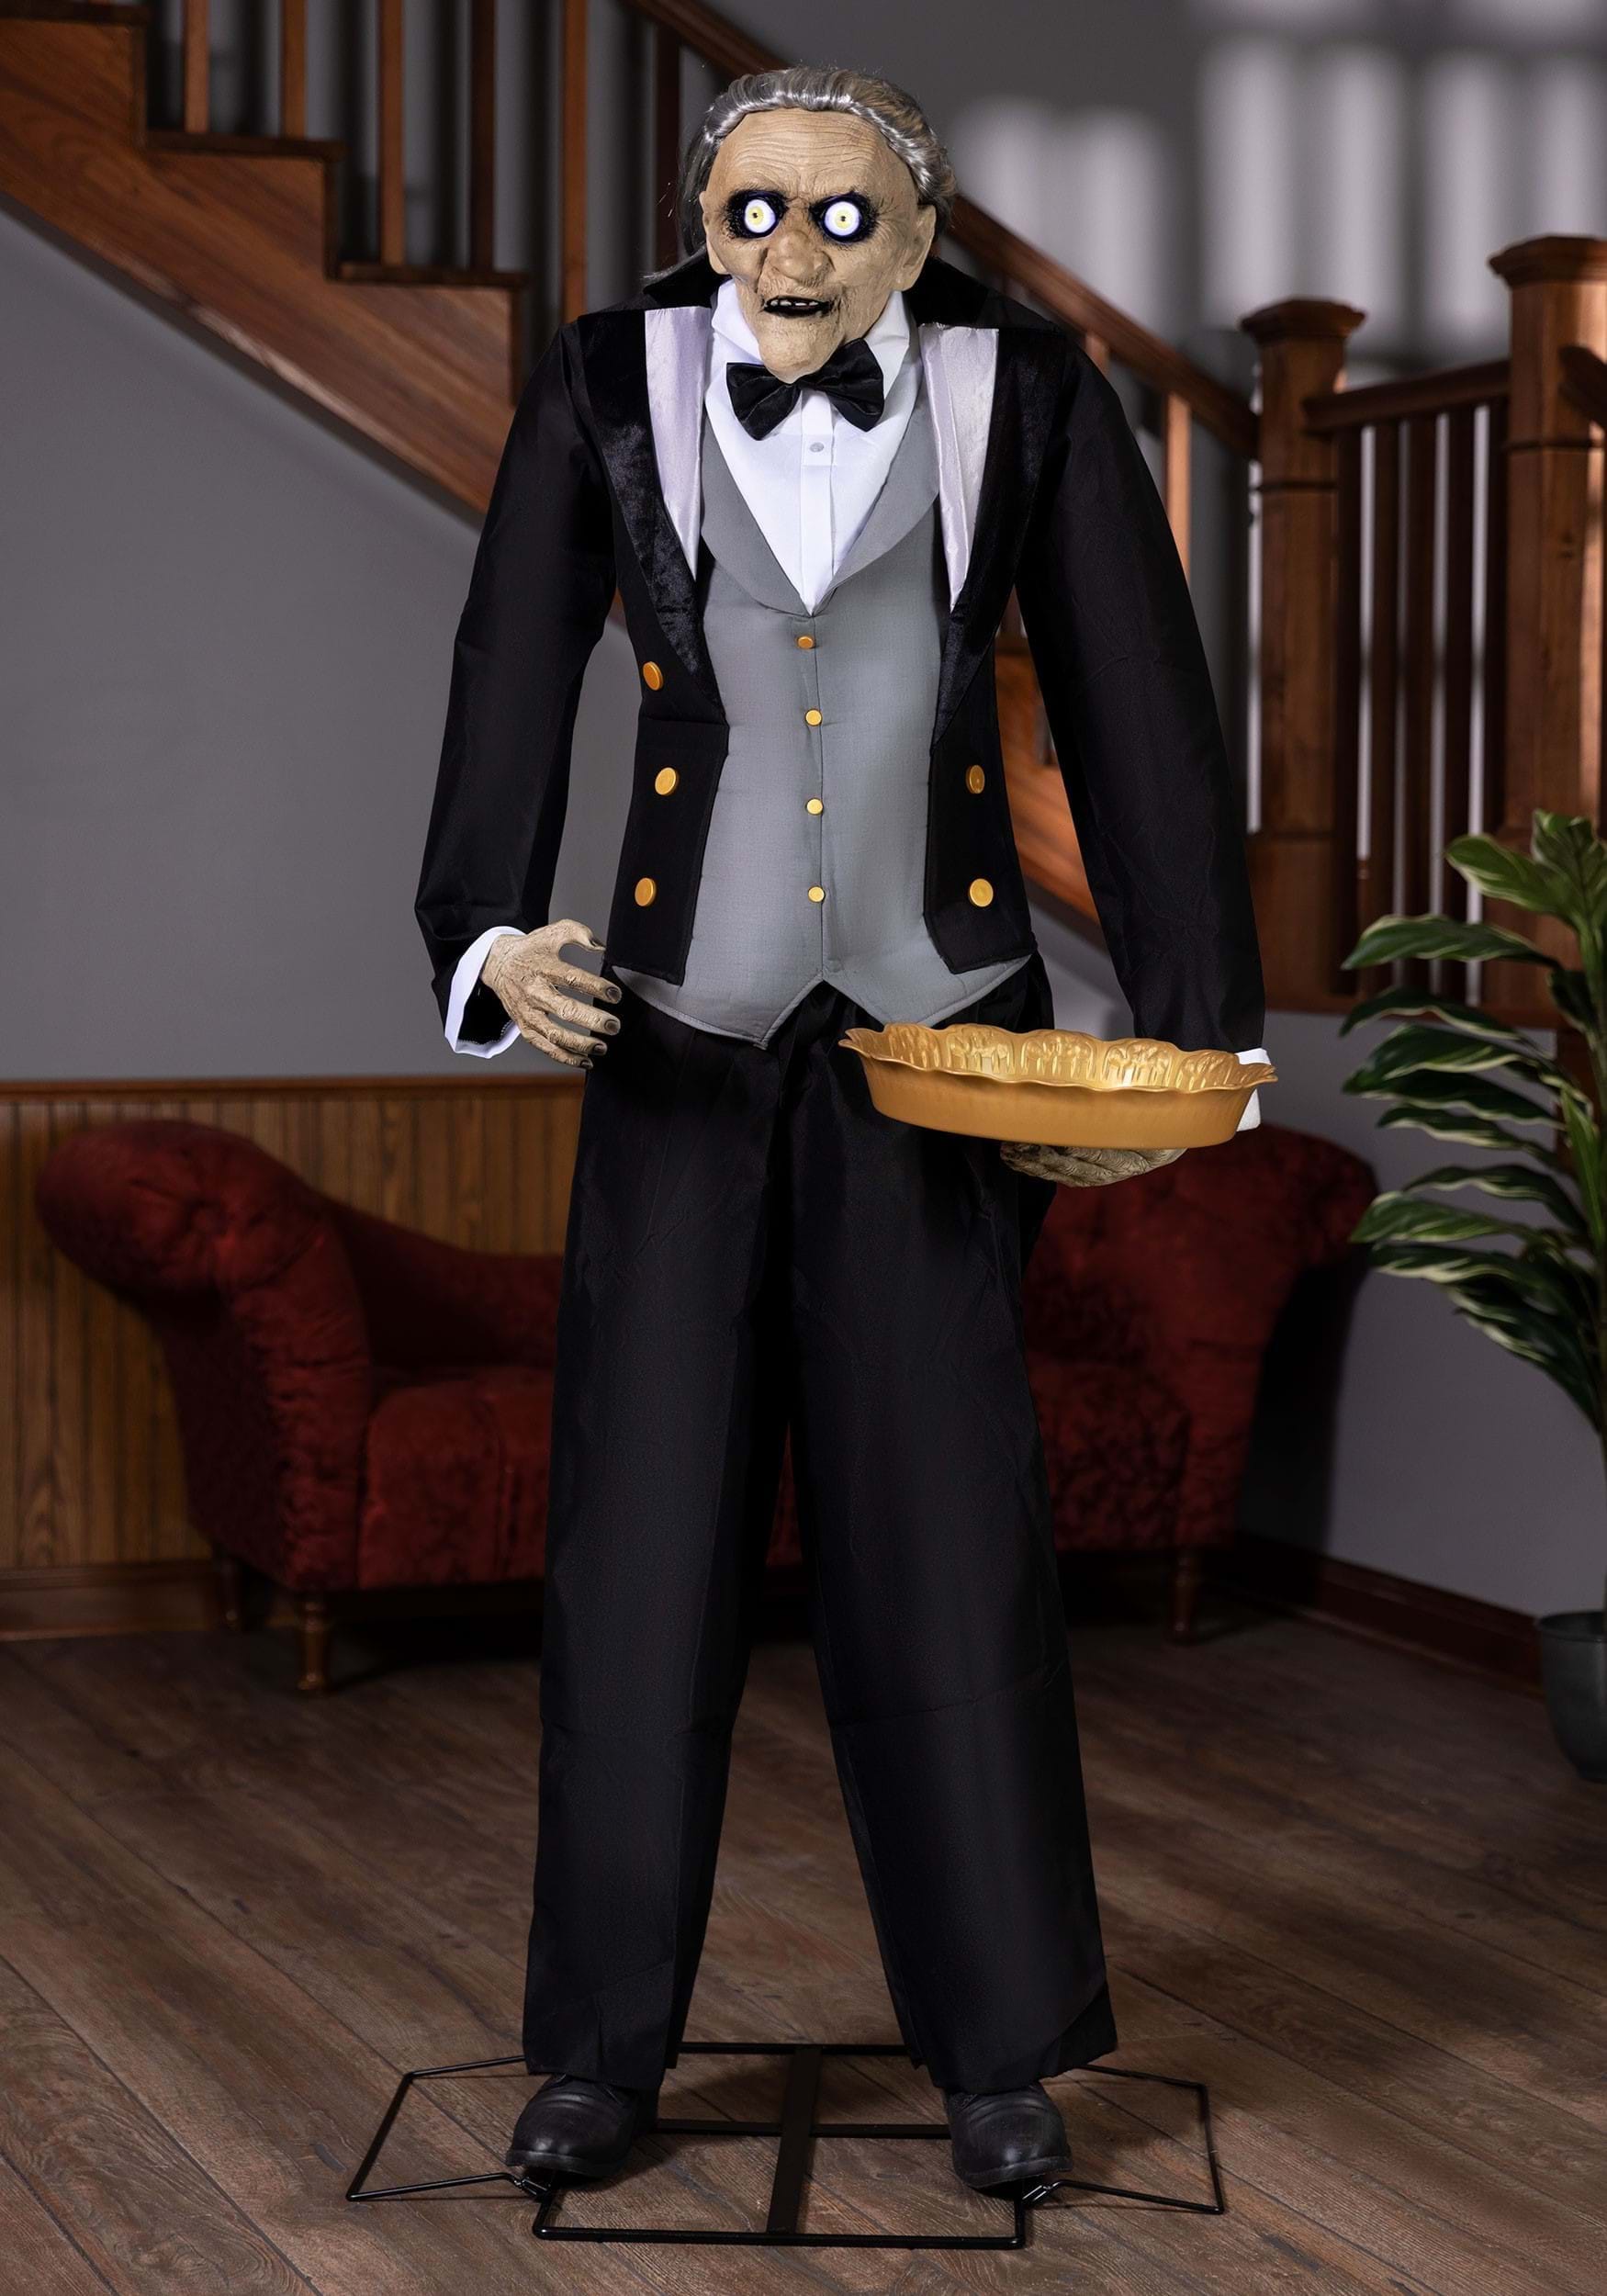 Image of 56 Foot Animatronic Evil Greeter Butler Decoration | Animated Decorations ID FUN4247-ST